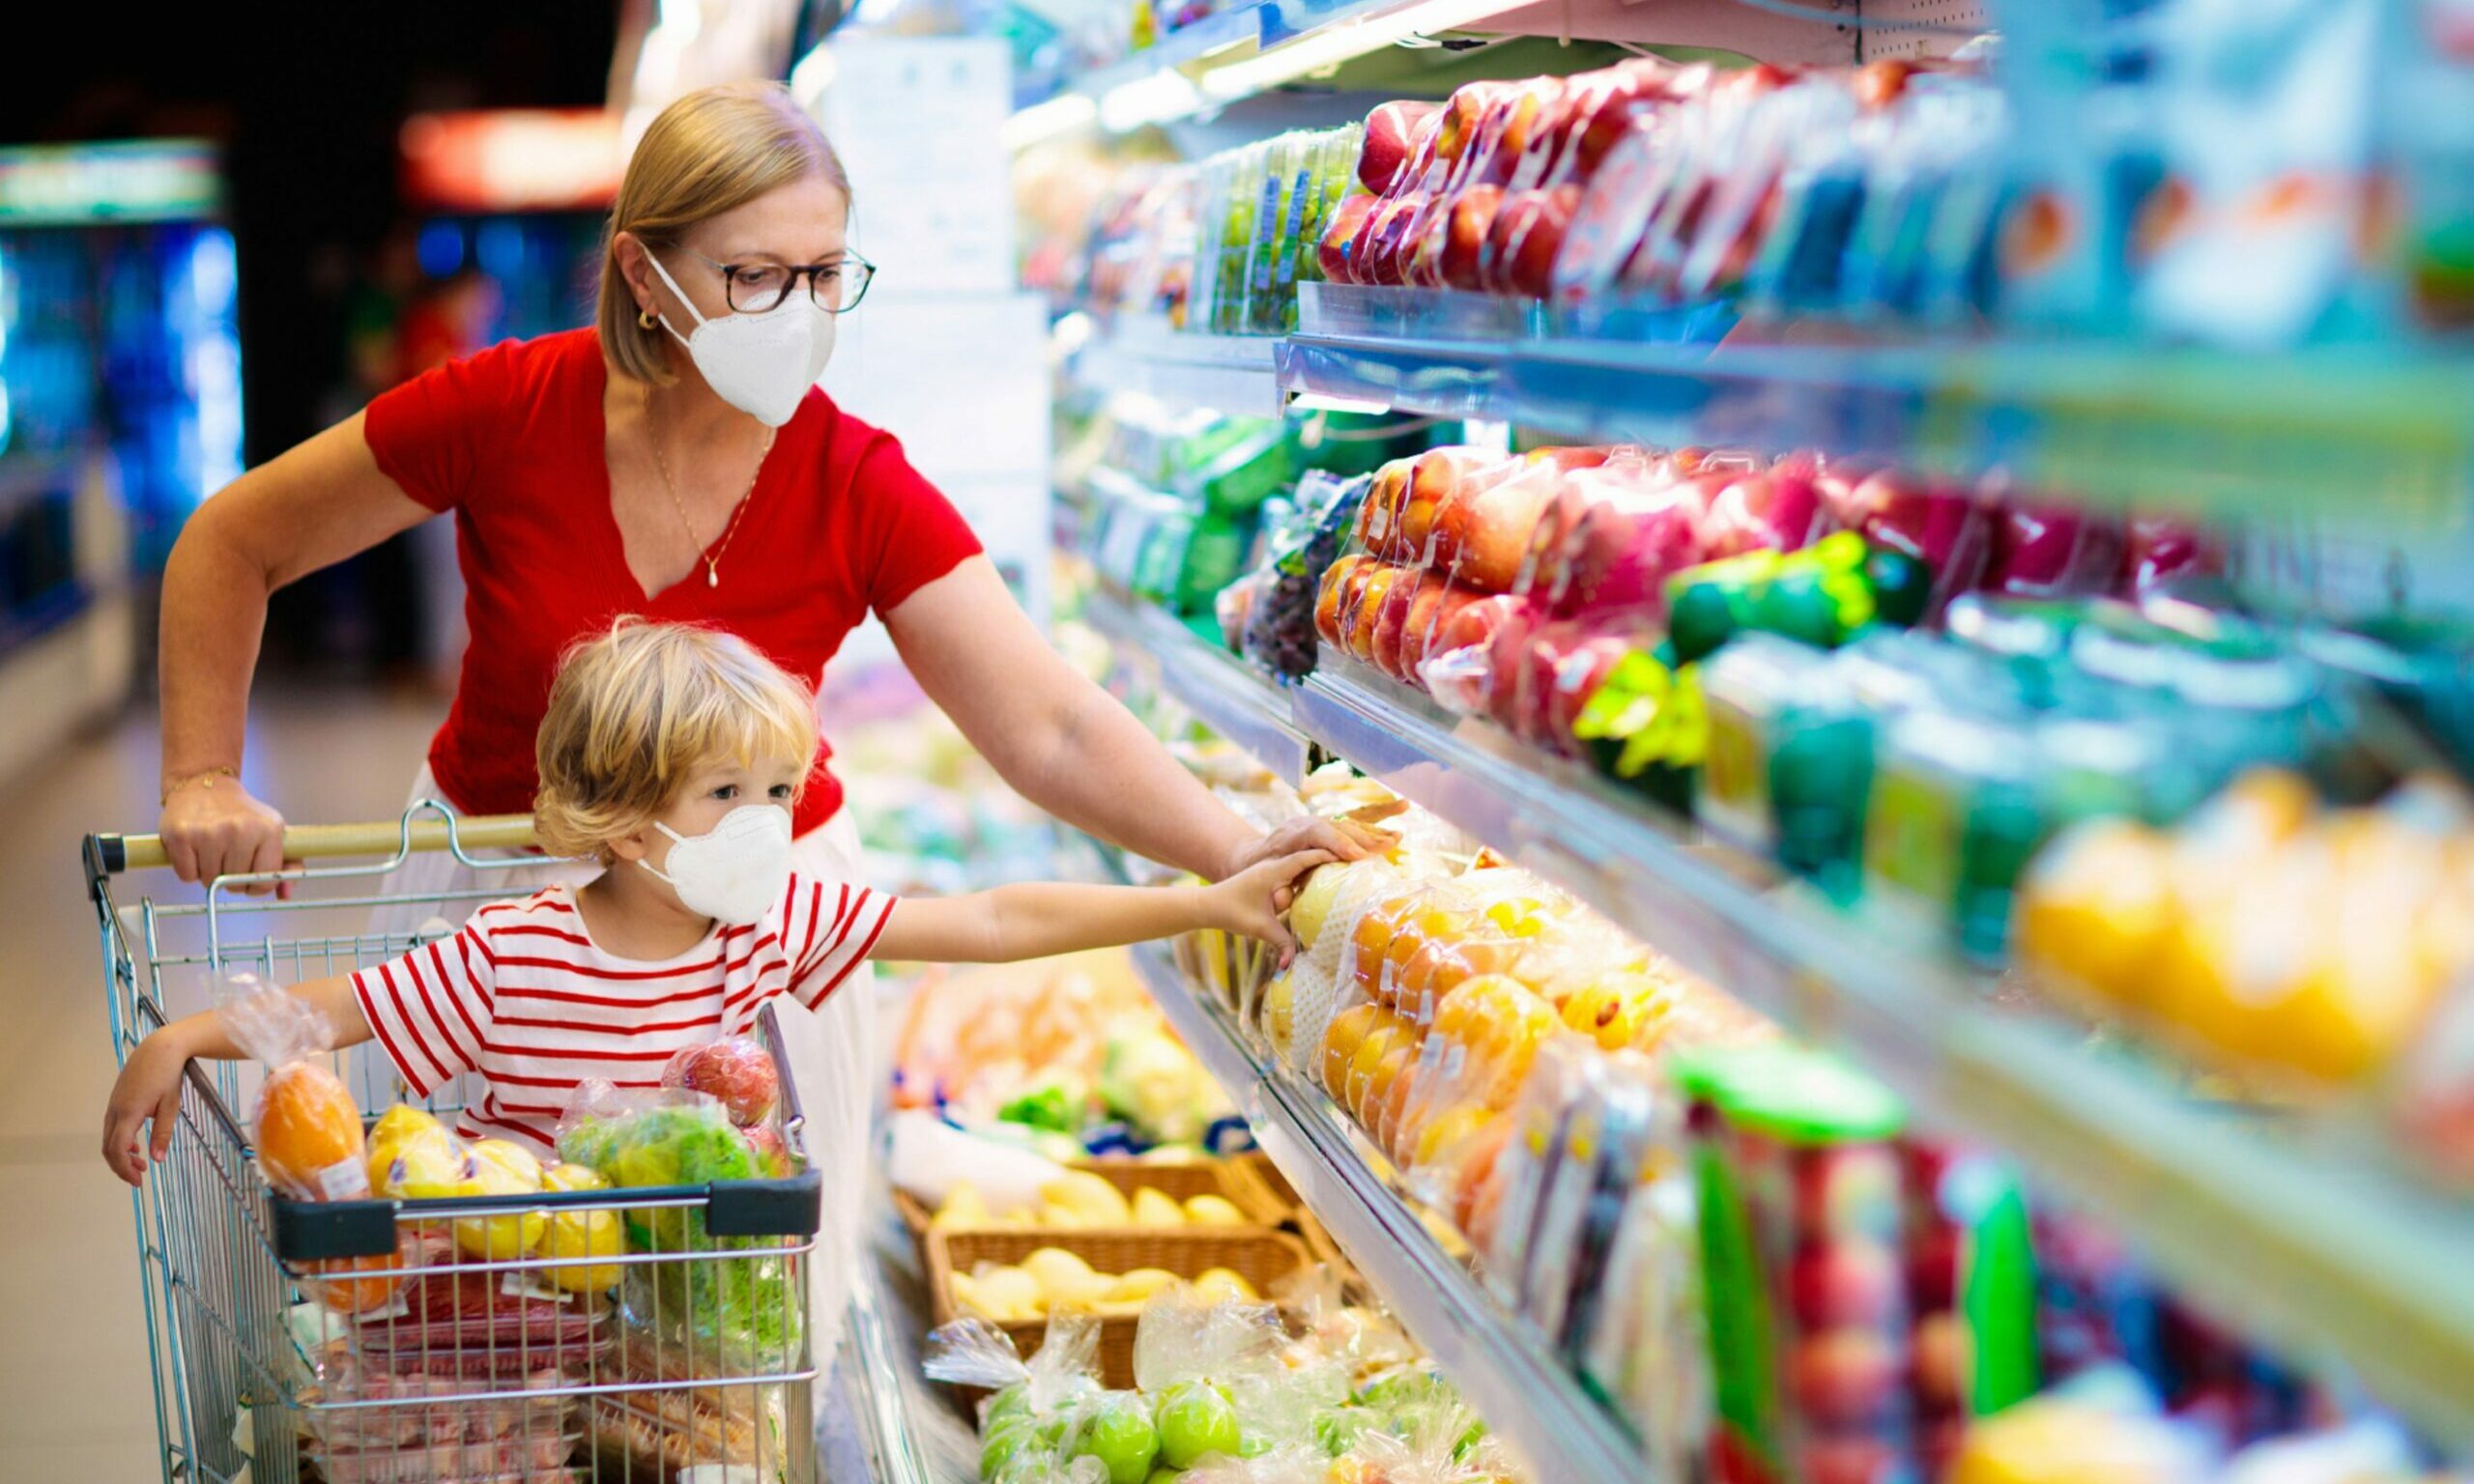 Can some shop owners ask that customers wear a face covering? Photo: Shutterstock